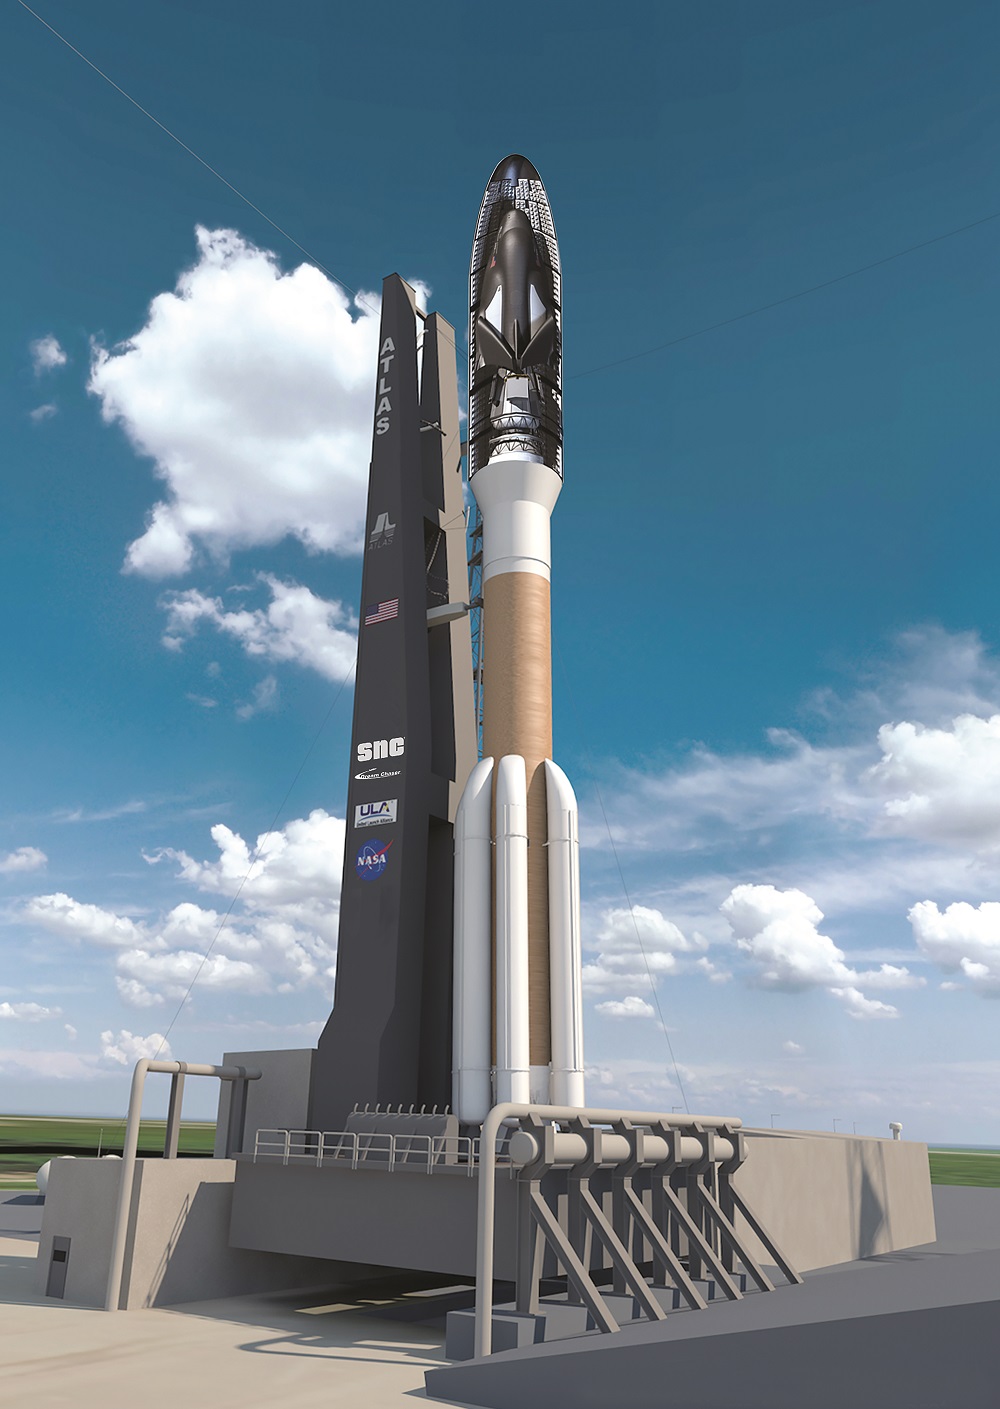 Dream-Chaser-LC-41-Atlas-551-CRS2-Tower_pre-launch.jpg